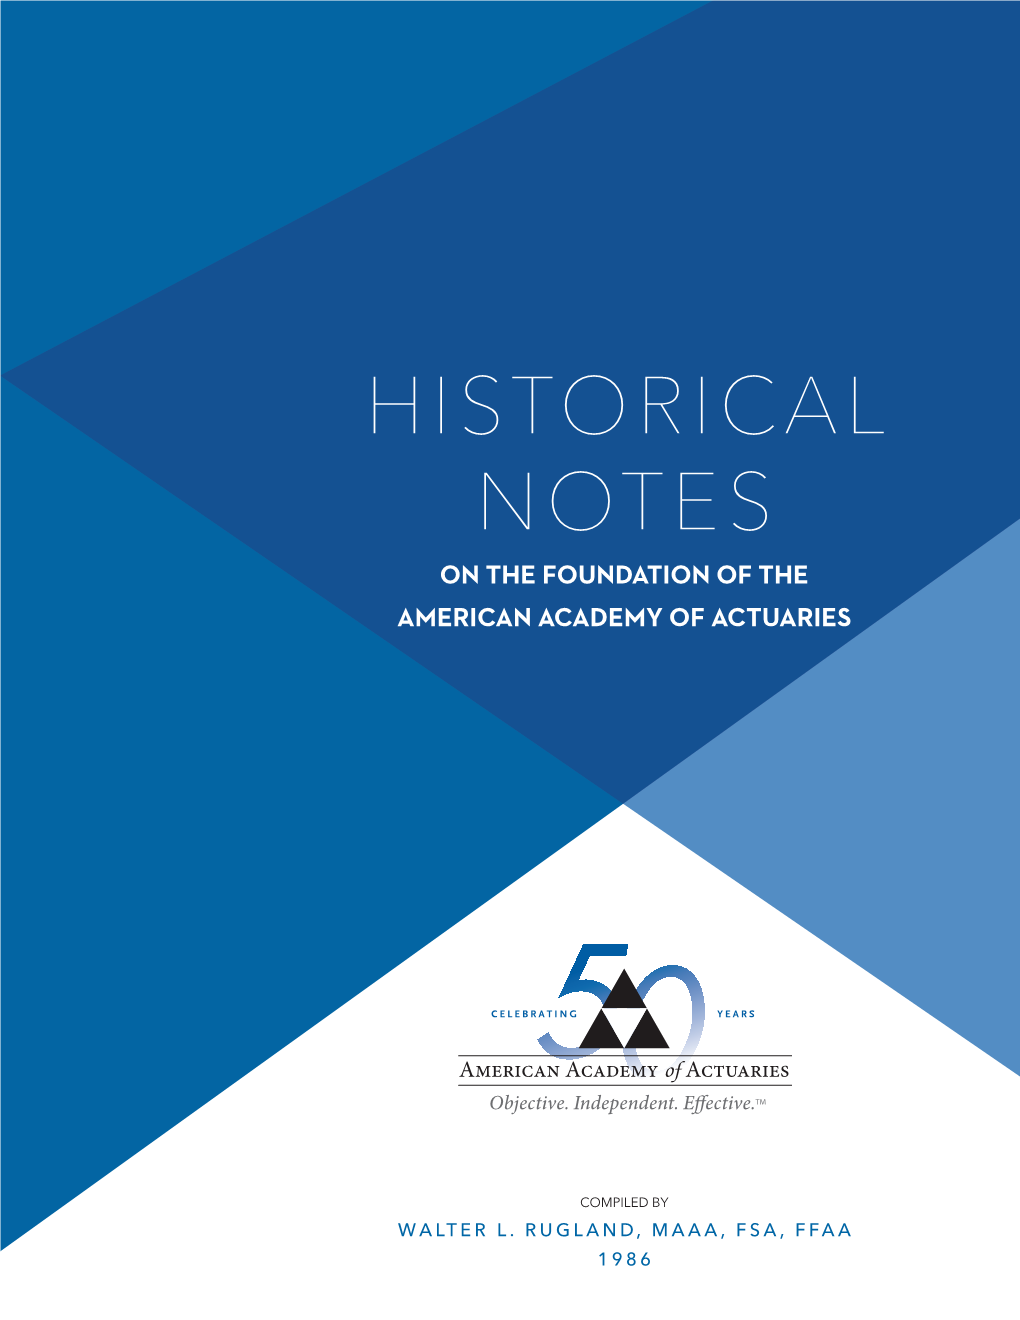 Historical Notes on the Foundation of the American Academy of Actuaries